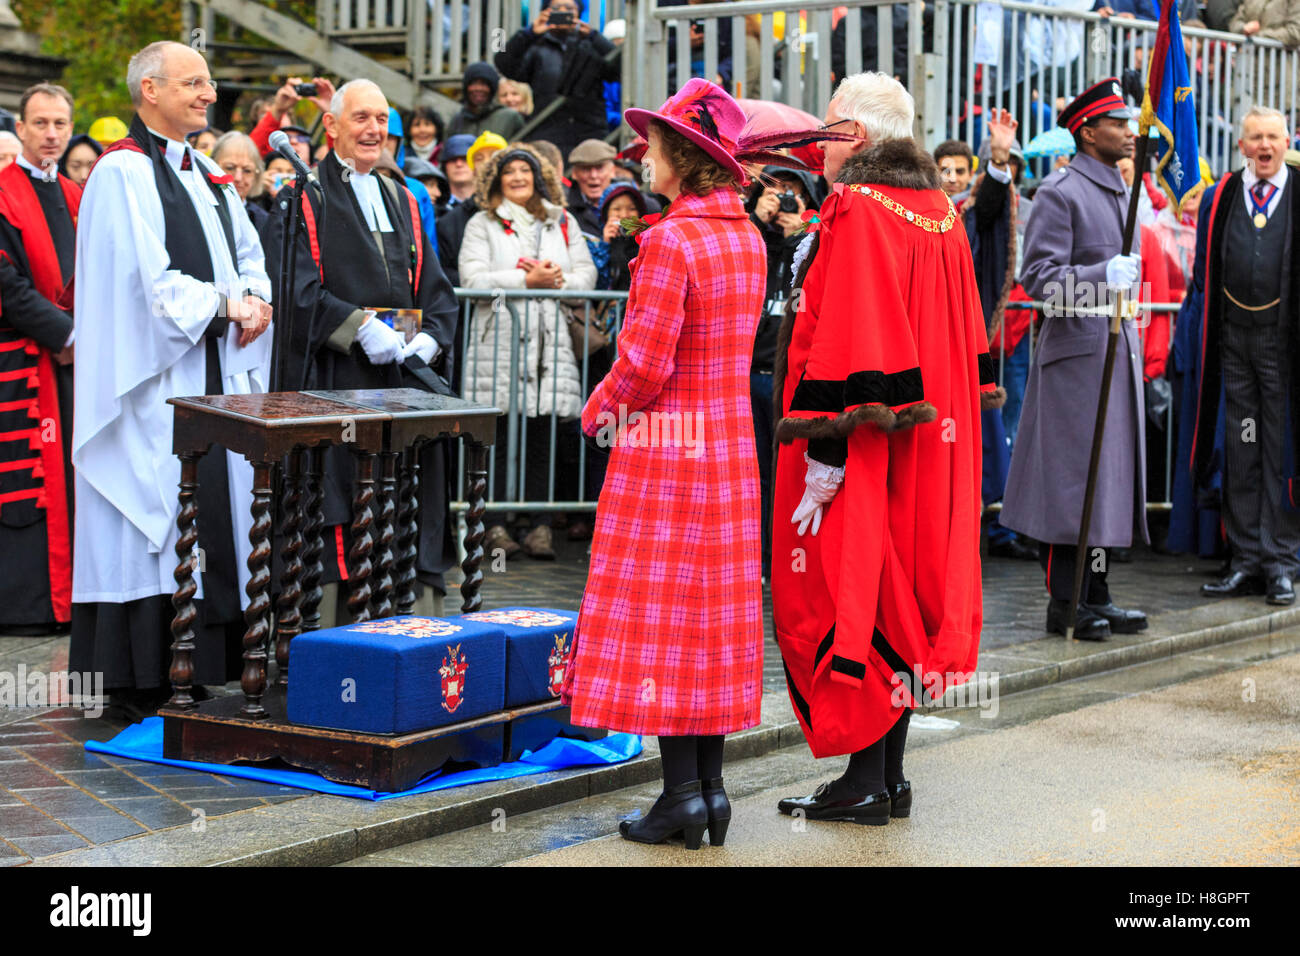 City of London, UK, 12th November 2016. The new Lord Mayor of the City of London, Andrew Parmley, and the Lady Mayoress, receive their blessing at St Paul's Cathedral during the Lord Mayor's Show 2016, which features over 7,000 participants, 150 horses, bands, vehicles and carriages. Credit:  Imageplotter News and Sports/Alamy Live News Stock Photo